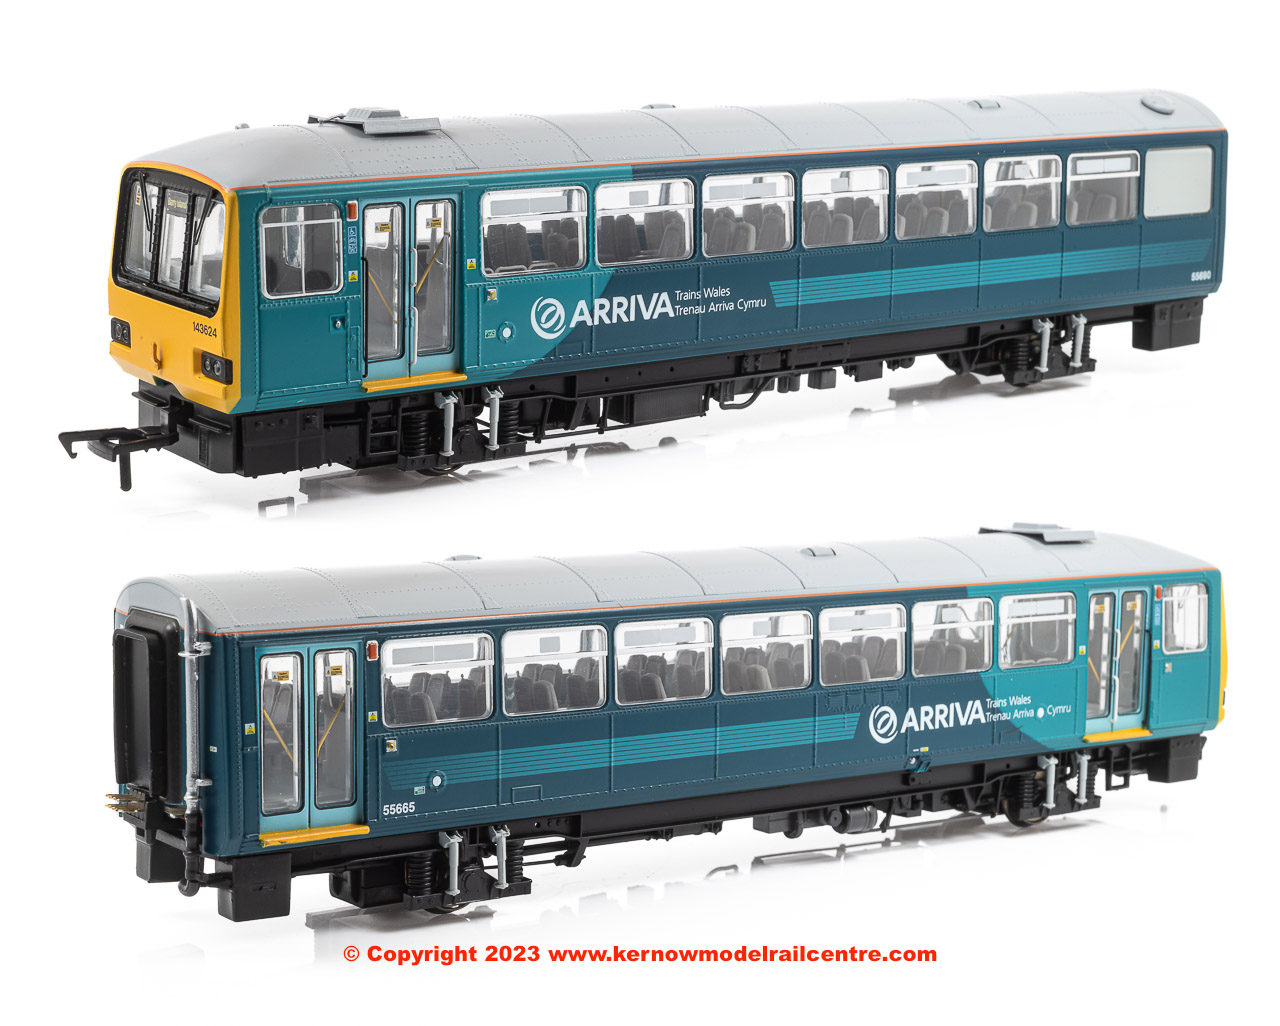 E83023 EFE Rail Class 143 2-Car Pacer DMU number 143 624 - Arriva Trains Wales (Revised)